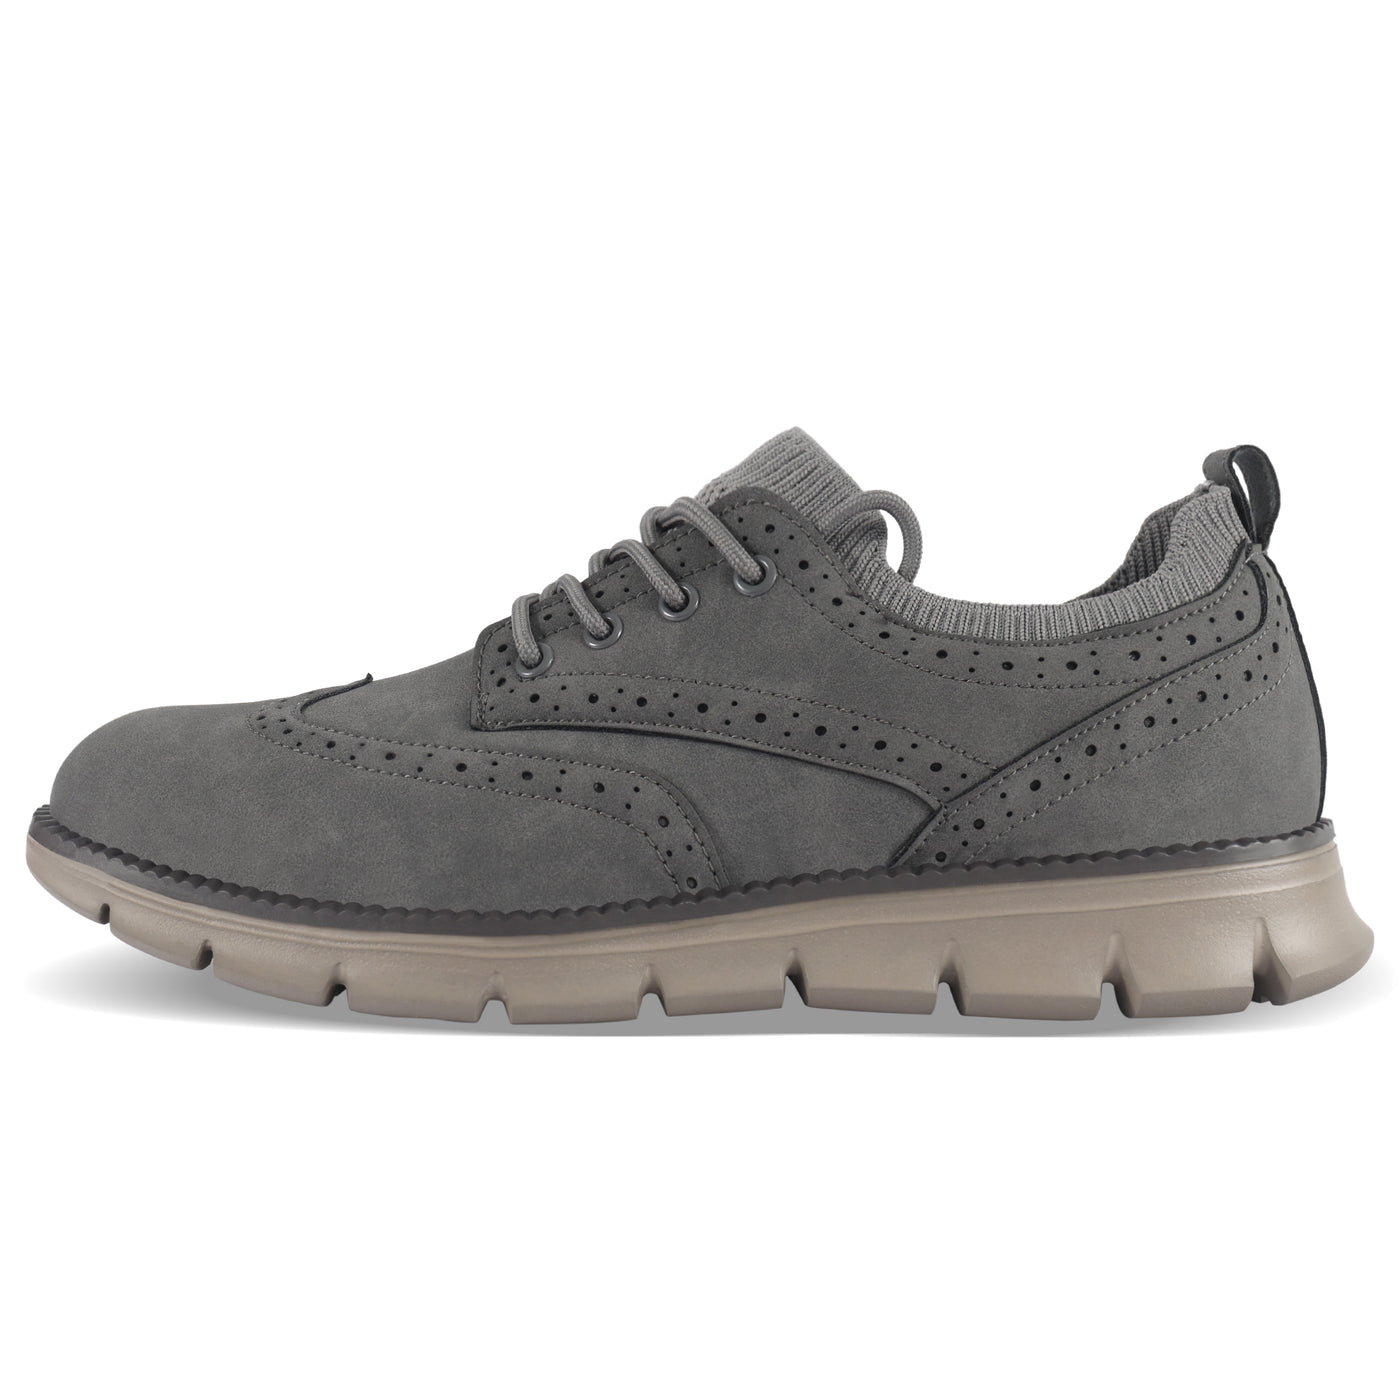 Just So So Men's Lace Up Oxford Shoes